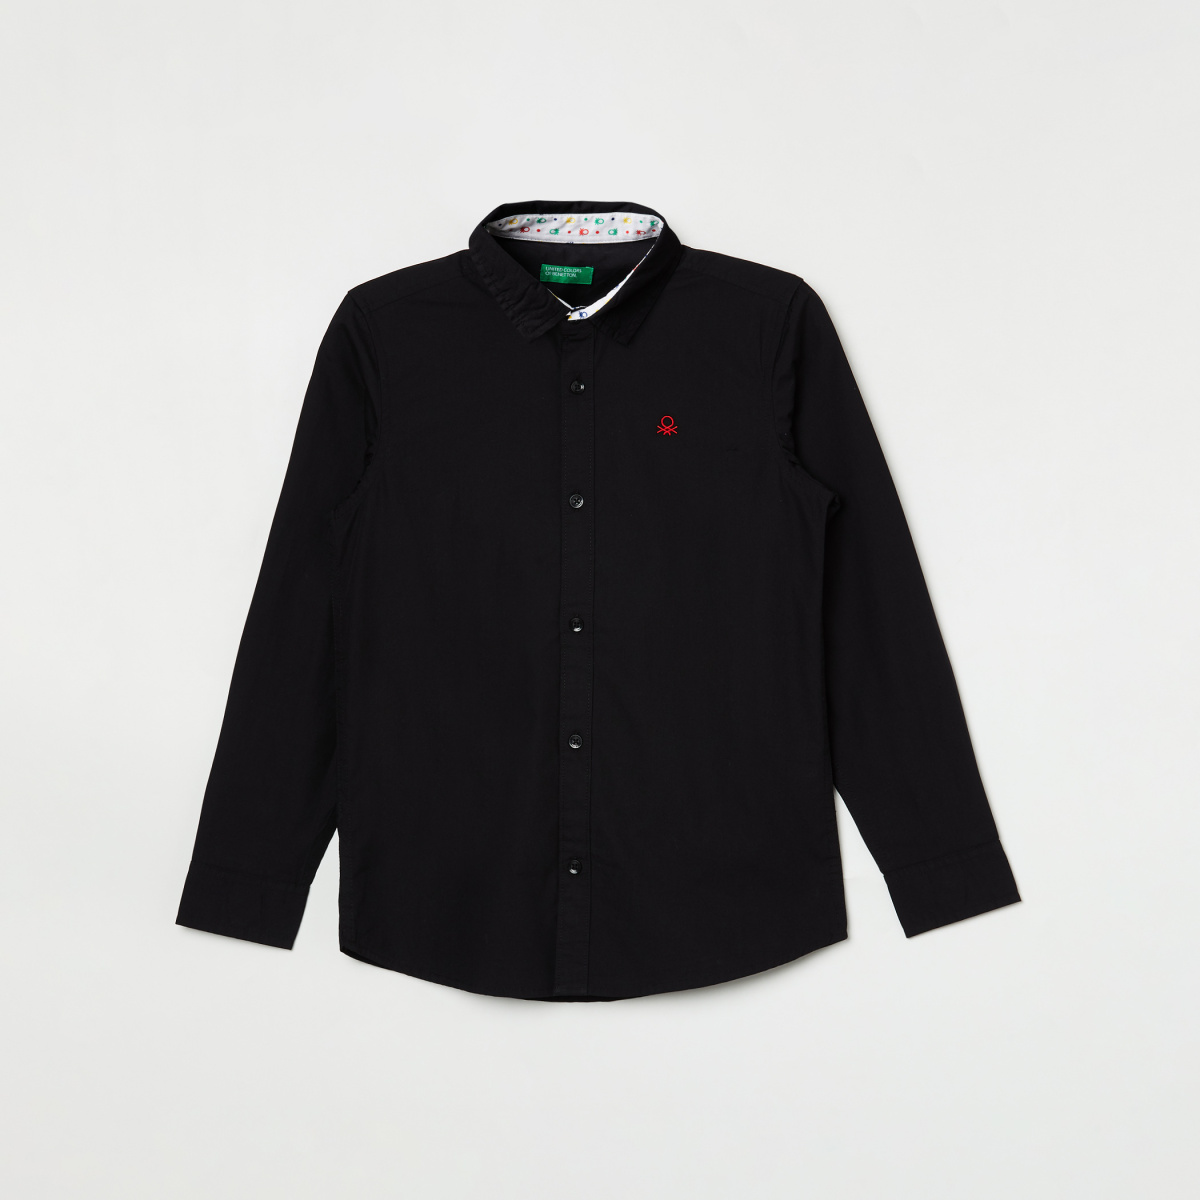 UNITED COLORS OF BENETTON Boys Solid Casual Shirt